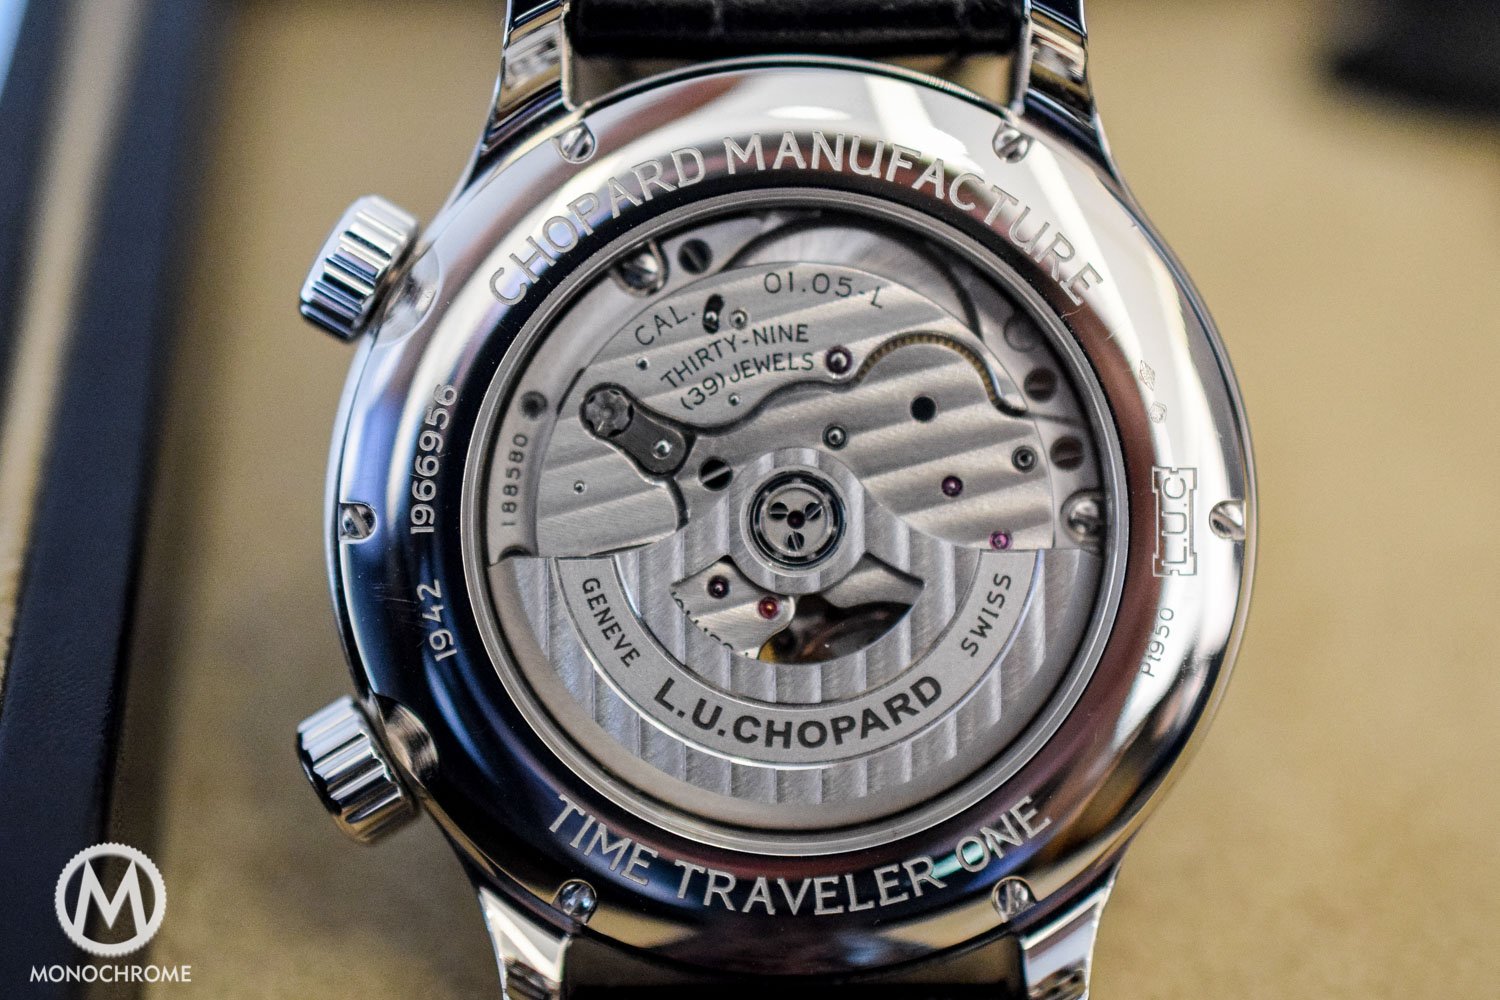 Chopard LUC Time Traveller One